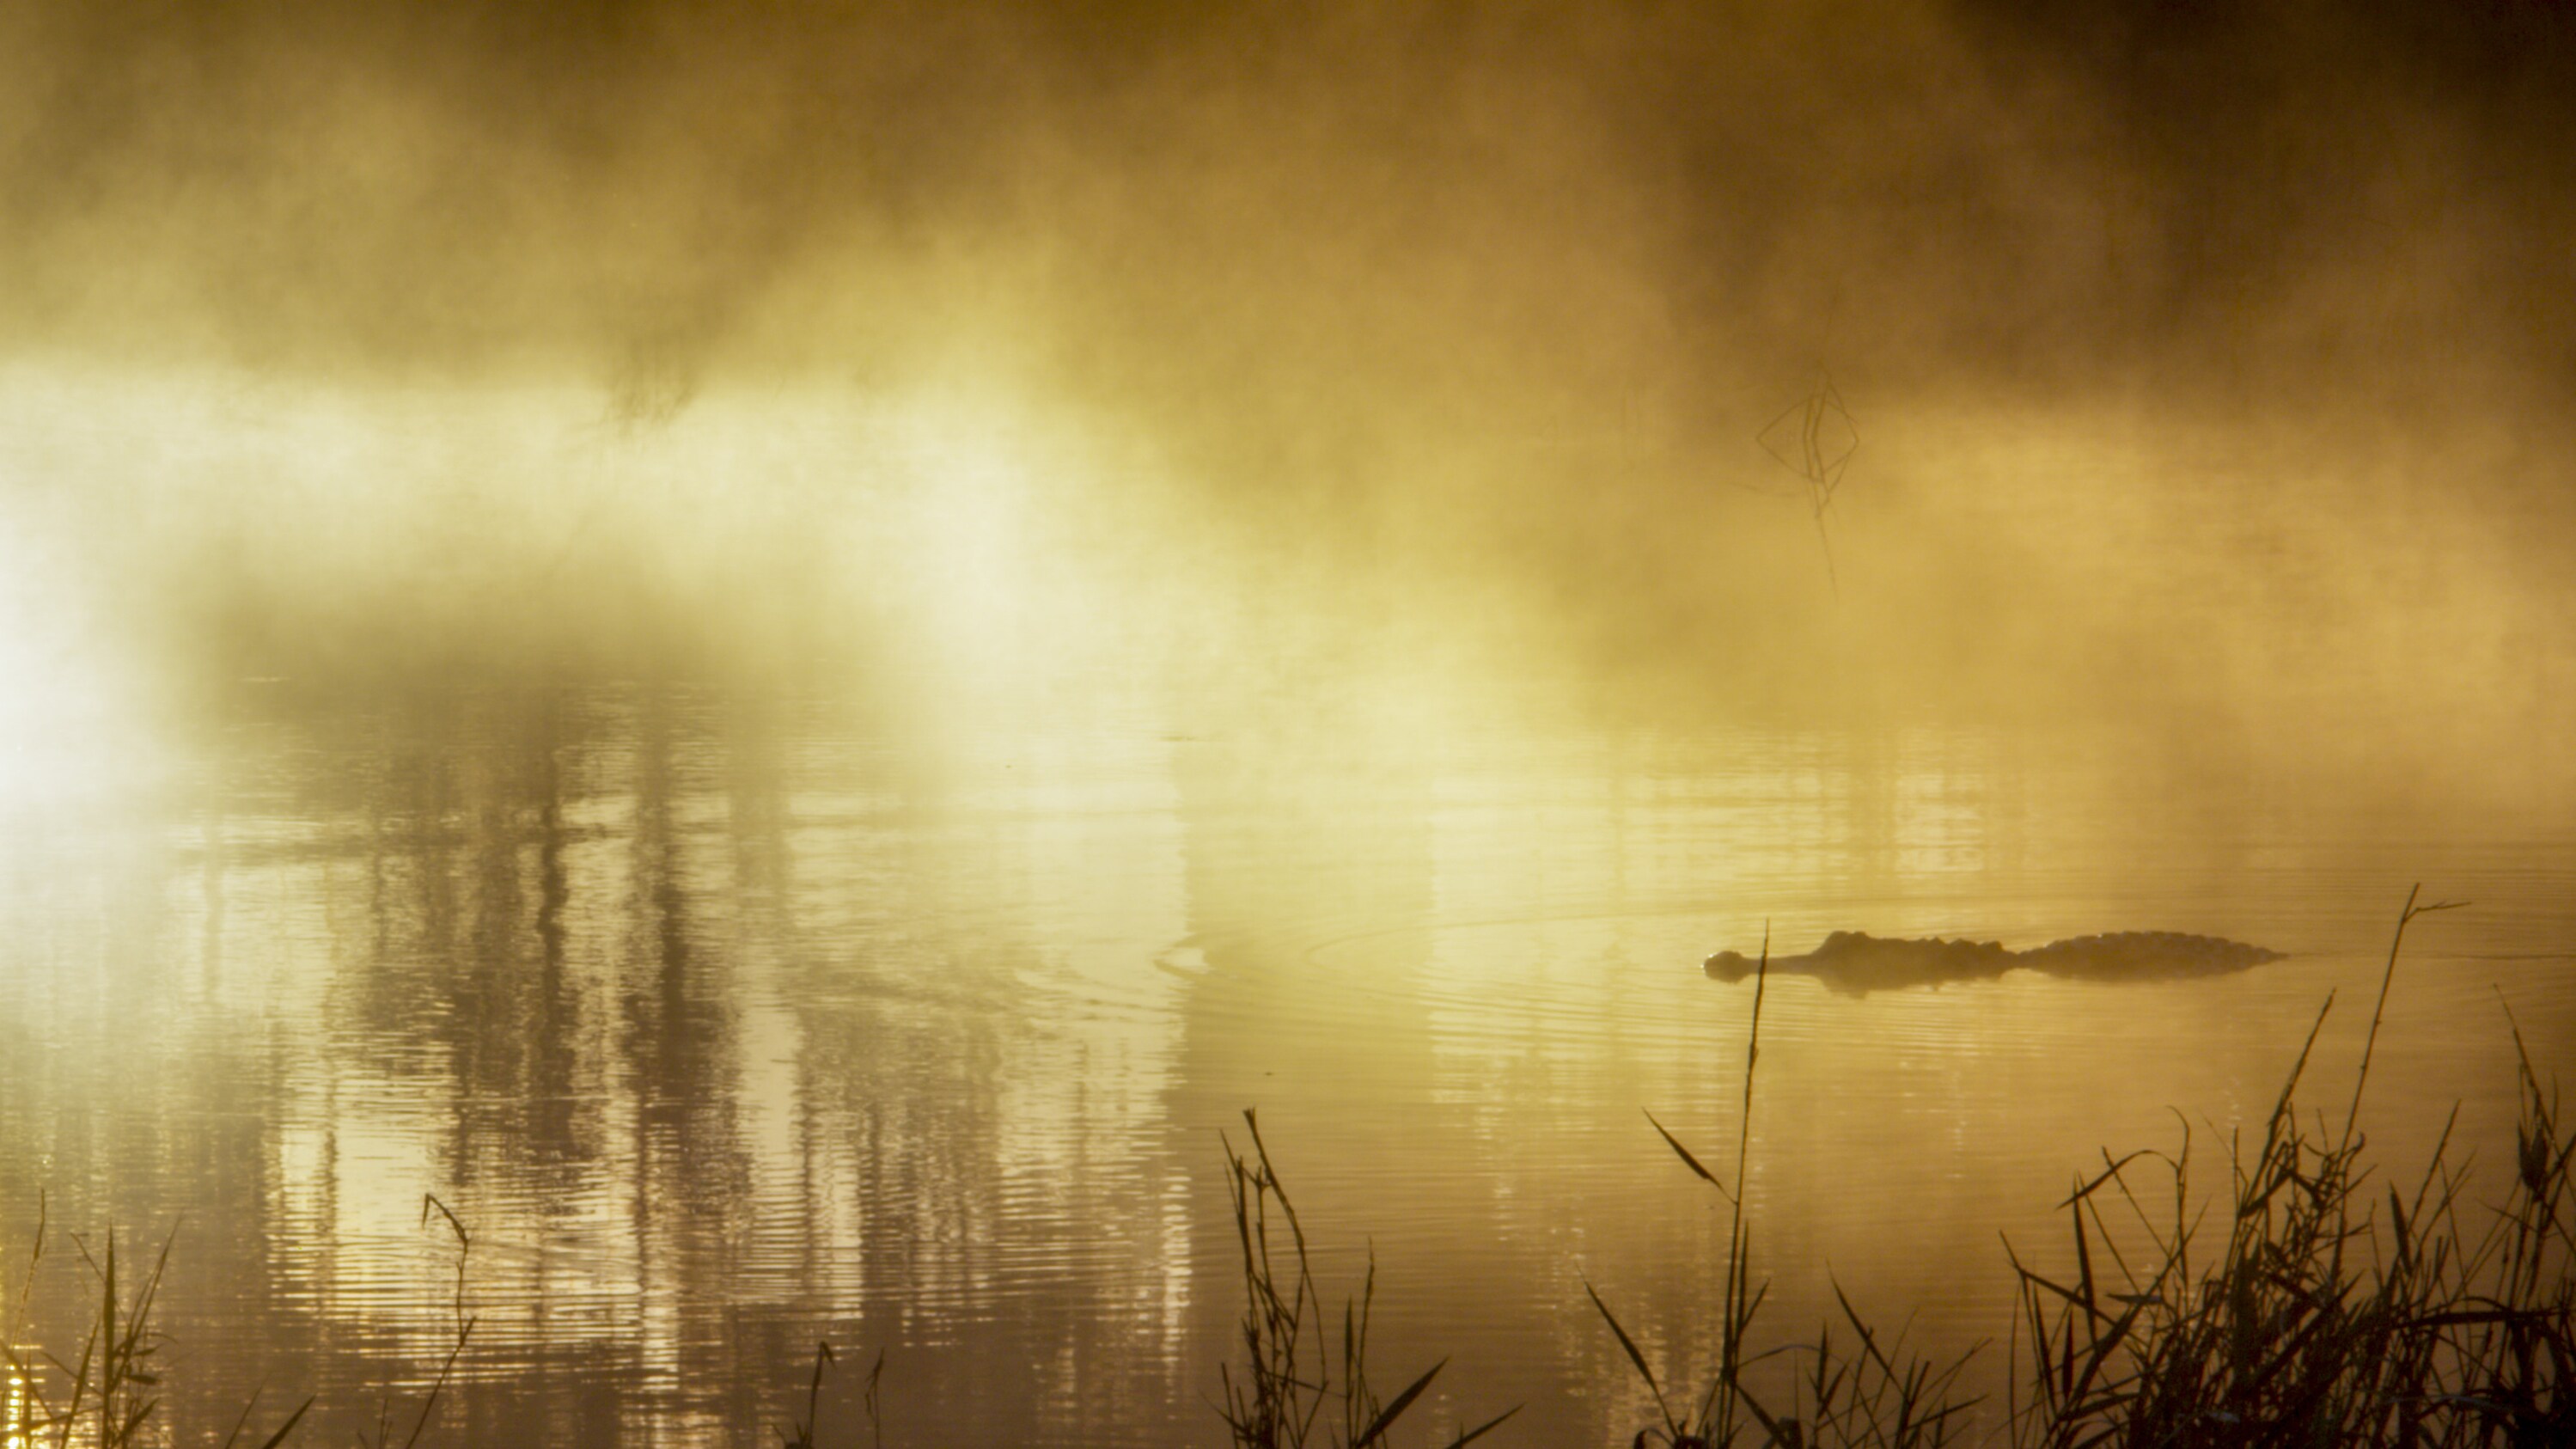 Sunrise penetrates through the early morning mist in the Southern swamps, revealing an American alligator on the lookout for an unsuspecting victim. (National Geographic for Disney+)